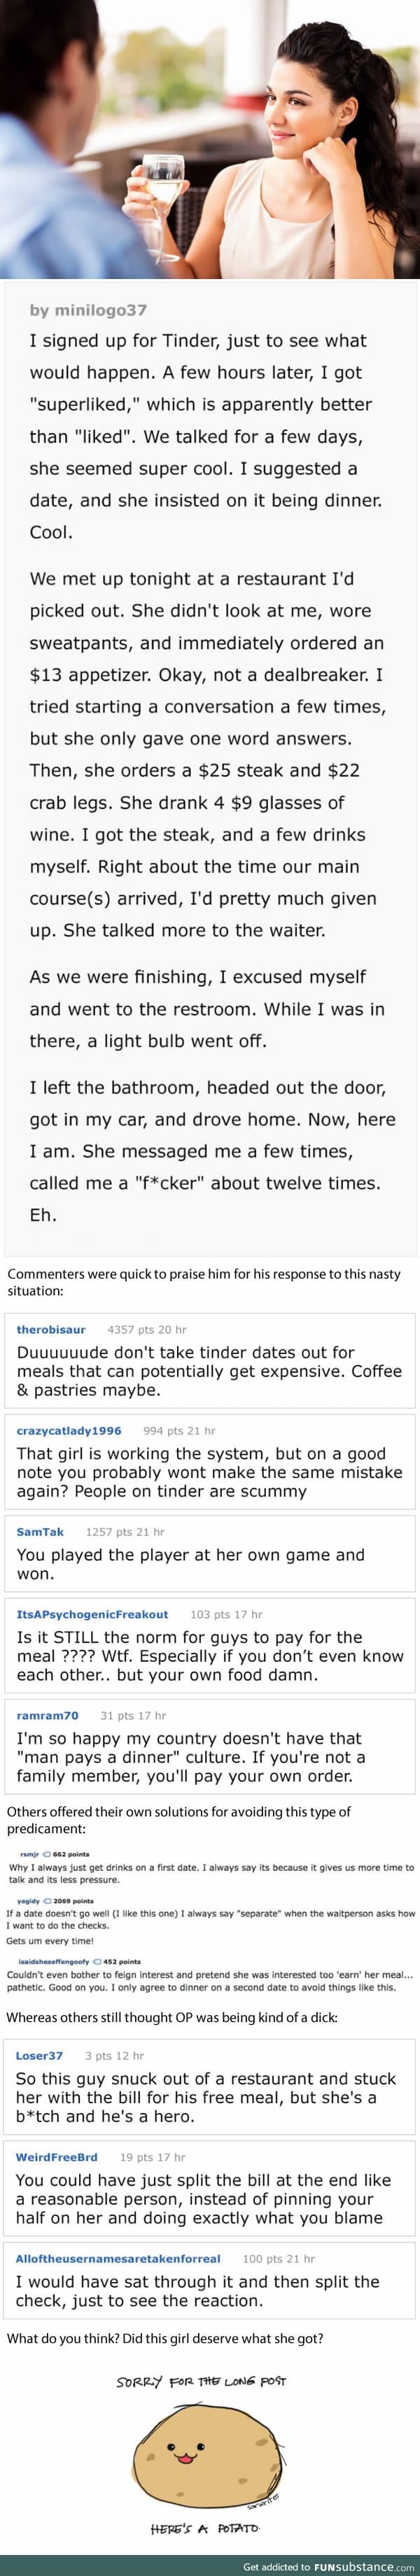 Girl tries to scam tinder date for a free fancy dinner but he turns the tables on her